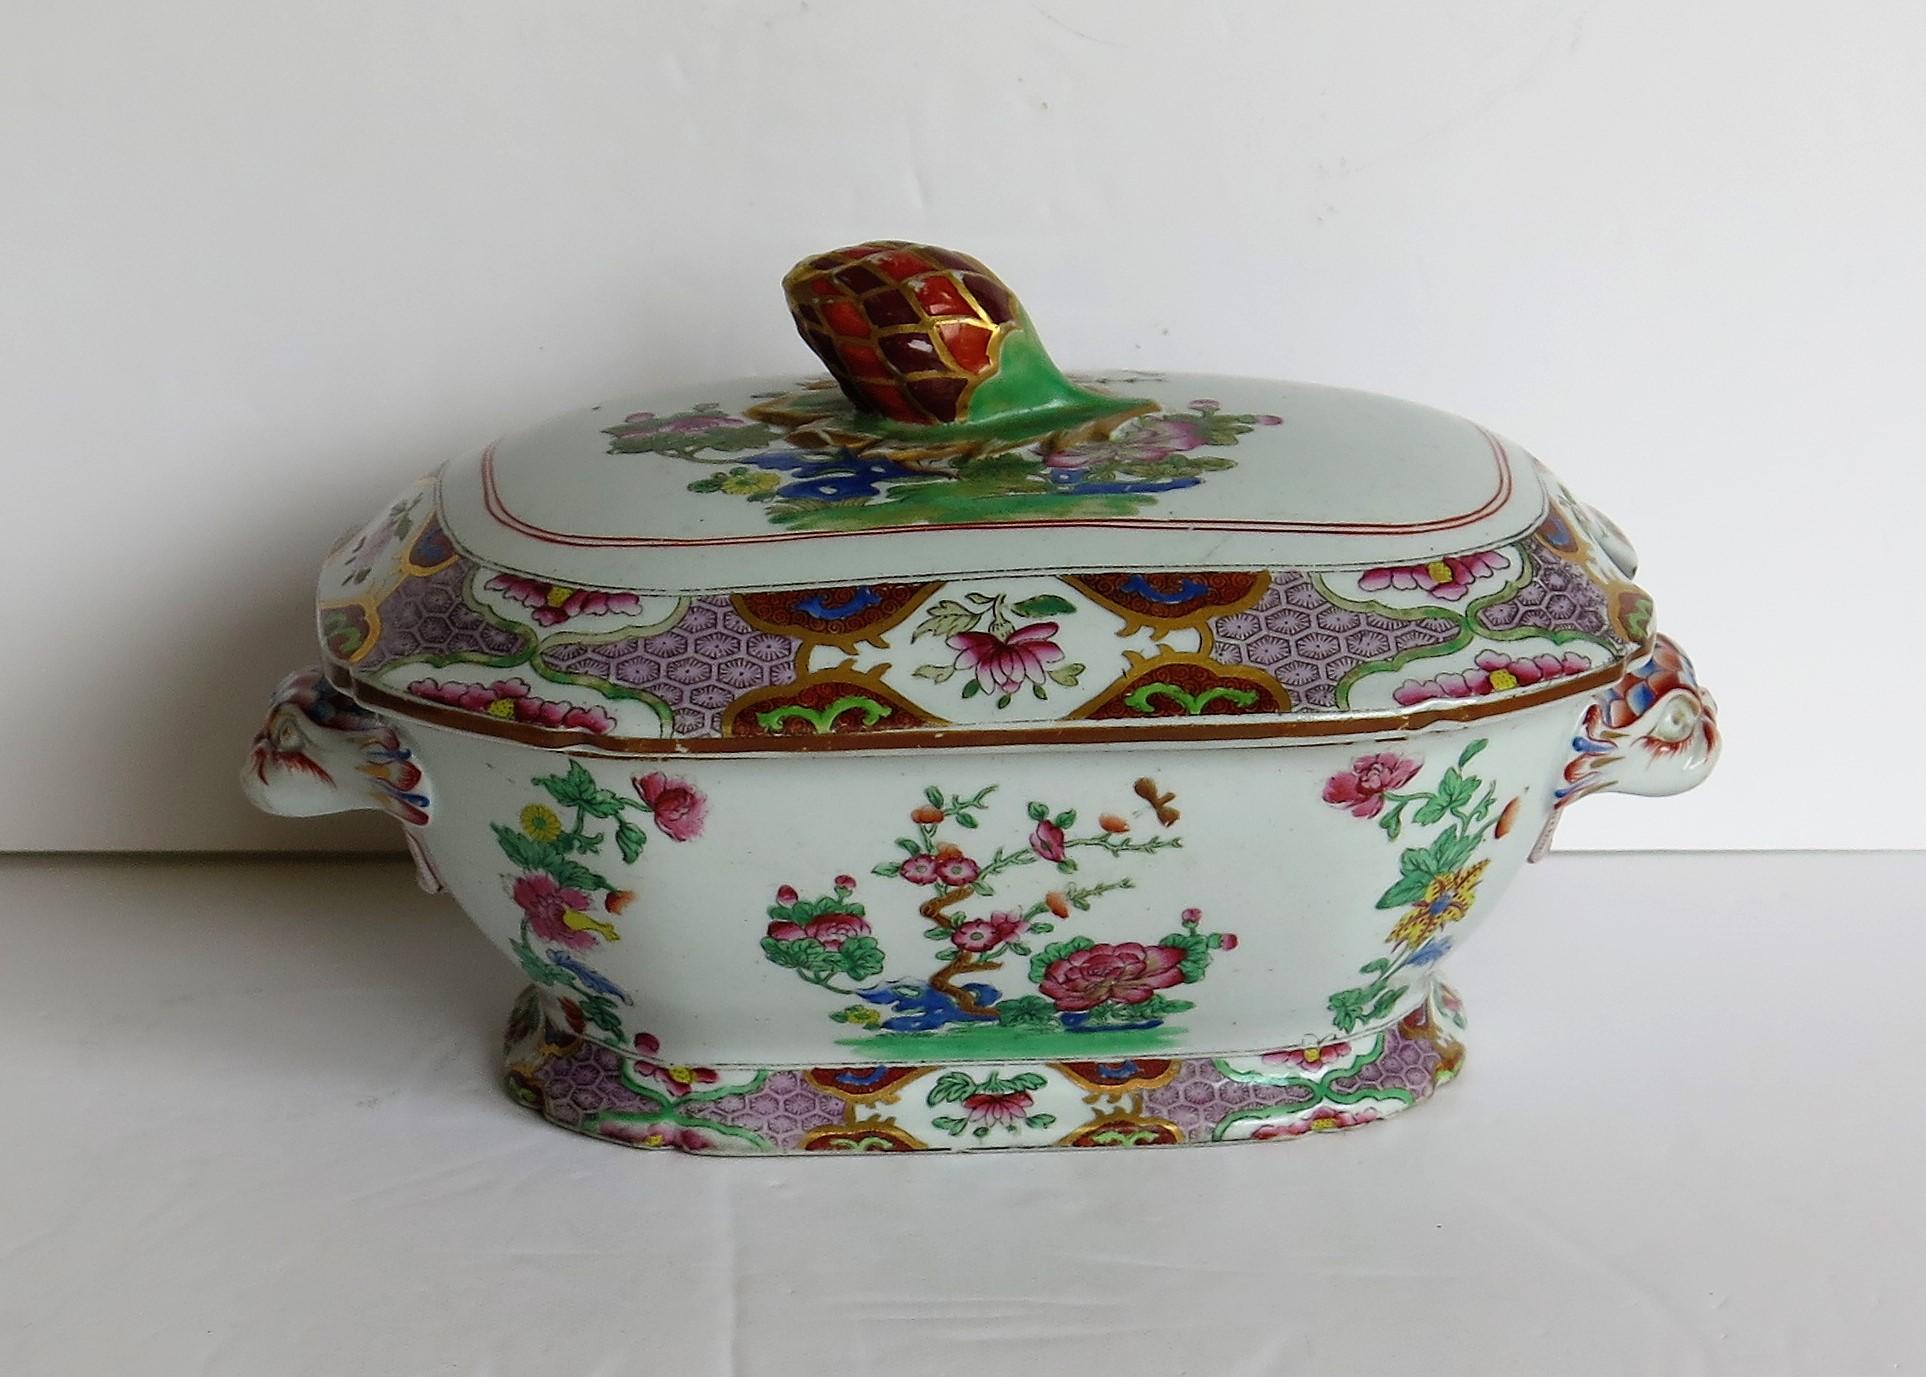 This is a very good sauce tureen and lid made of ironstone (Spode's Stone China) in the Willis Pattern, No 2647, produced by the English, Spode factory early in the 19th century, George 111rd period, circa 1810.

This sauce tureen comprises two